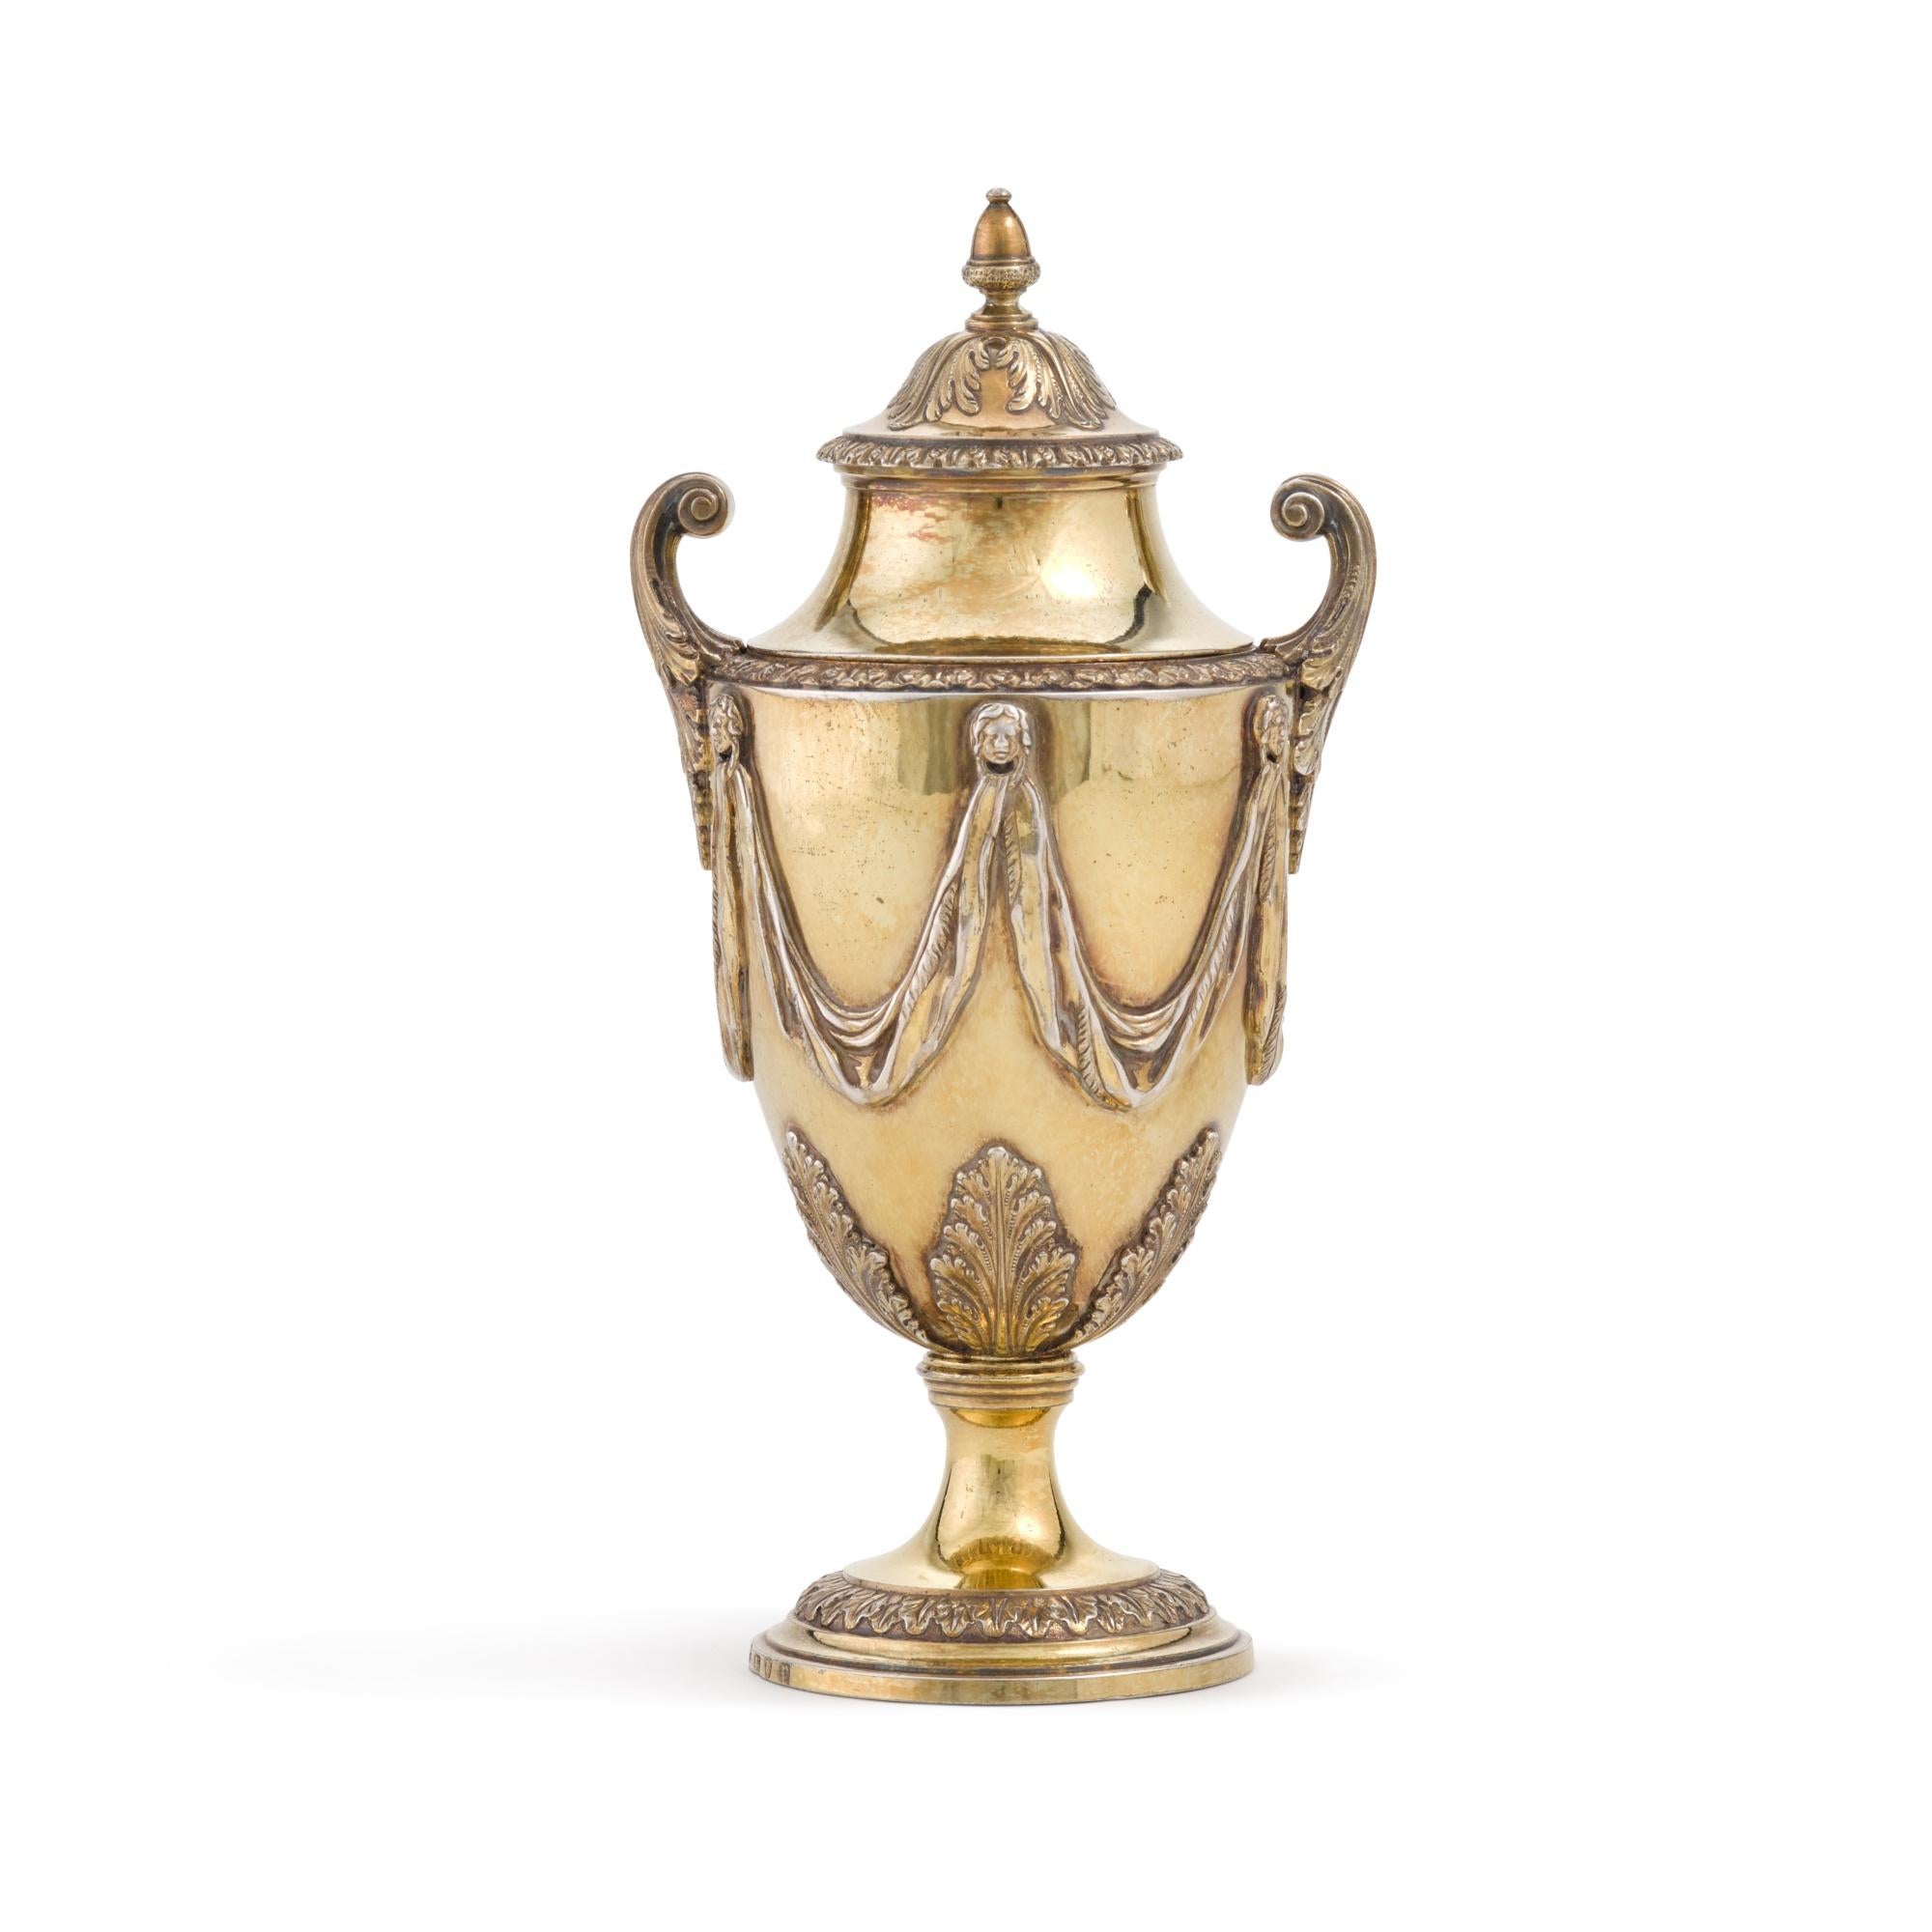 A fine and rare 18th century George III silver-gilt vase by Daniel Smith and Robert Sharp, London 1770. Based on a design by the Italian printmaker Stefano della Bella (1610-1664). The design was adapted by the architect Robert Adam